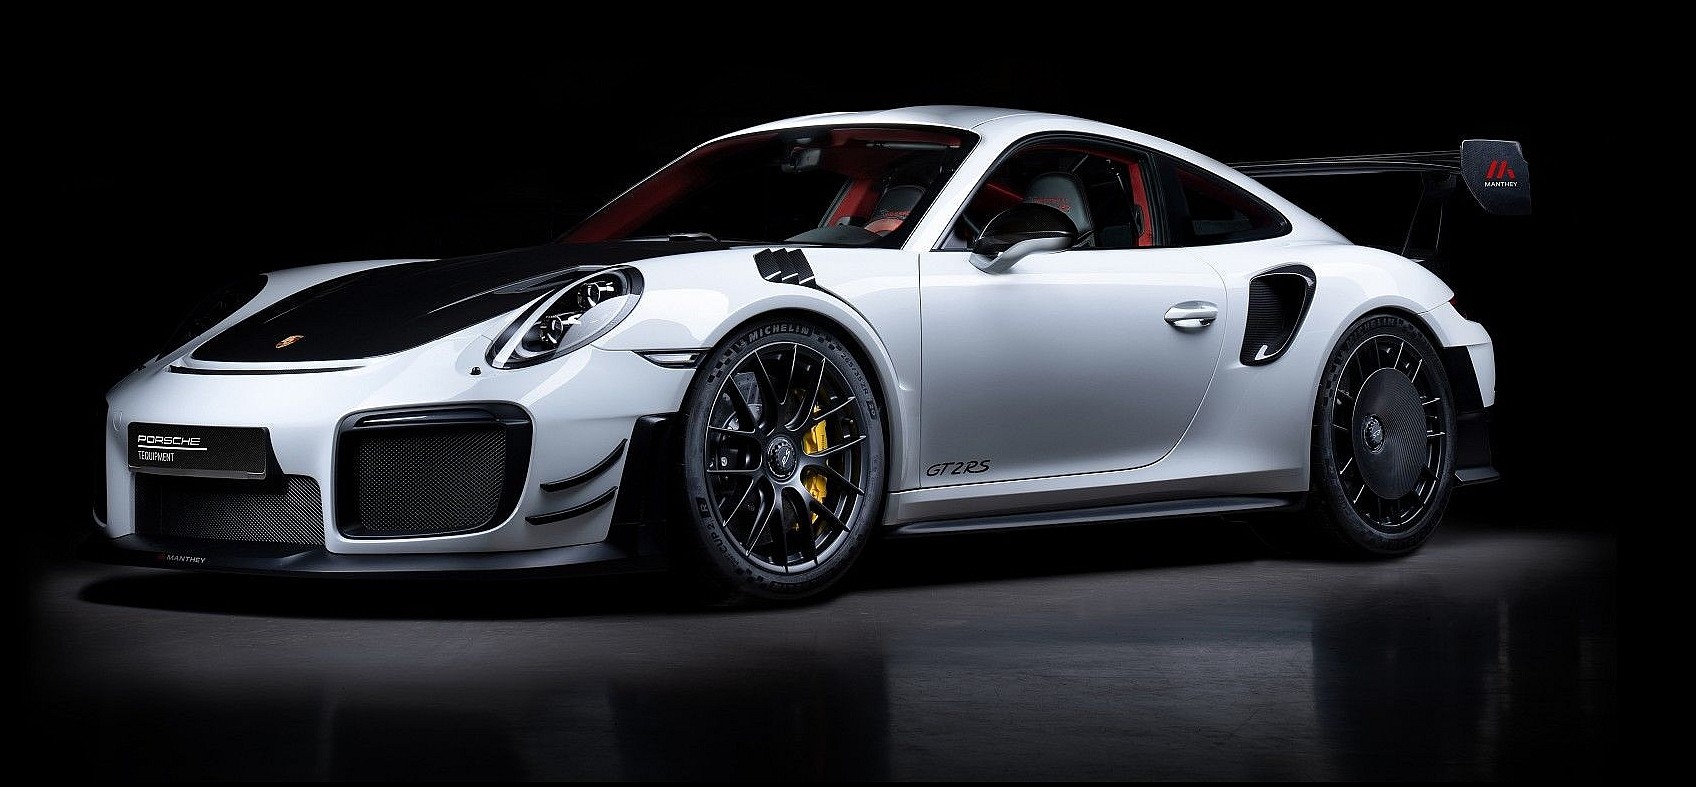 Porsche Now Offers Manthey-Racing Performance Kits for the 911 GT2 and